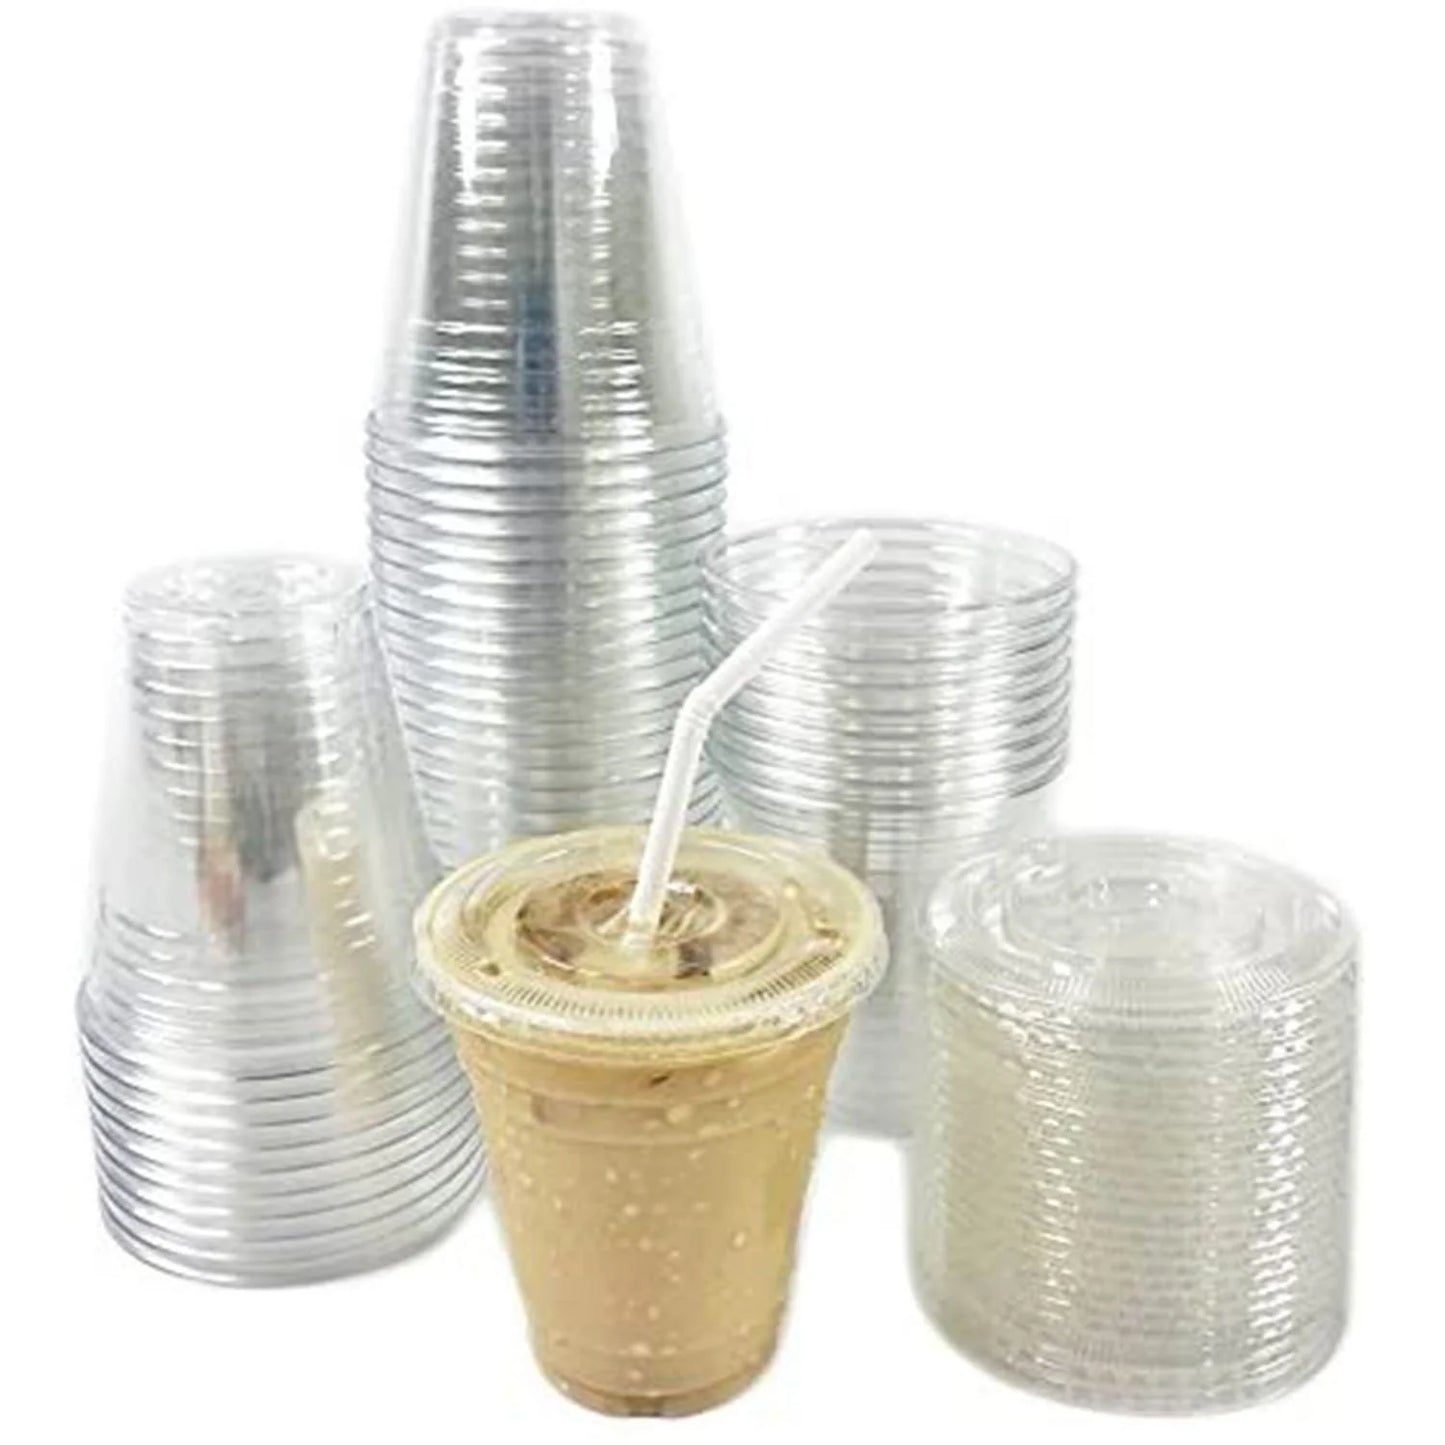 *WHOLESALE* PET Flat Lids with Straw Slot for 12, 16, 20 & 24 oz. | 1000 ct/Case Tops & Straw VeZee   